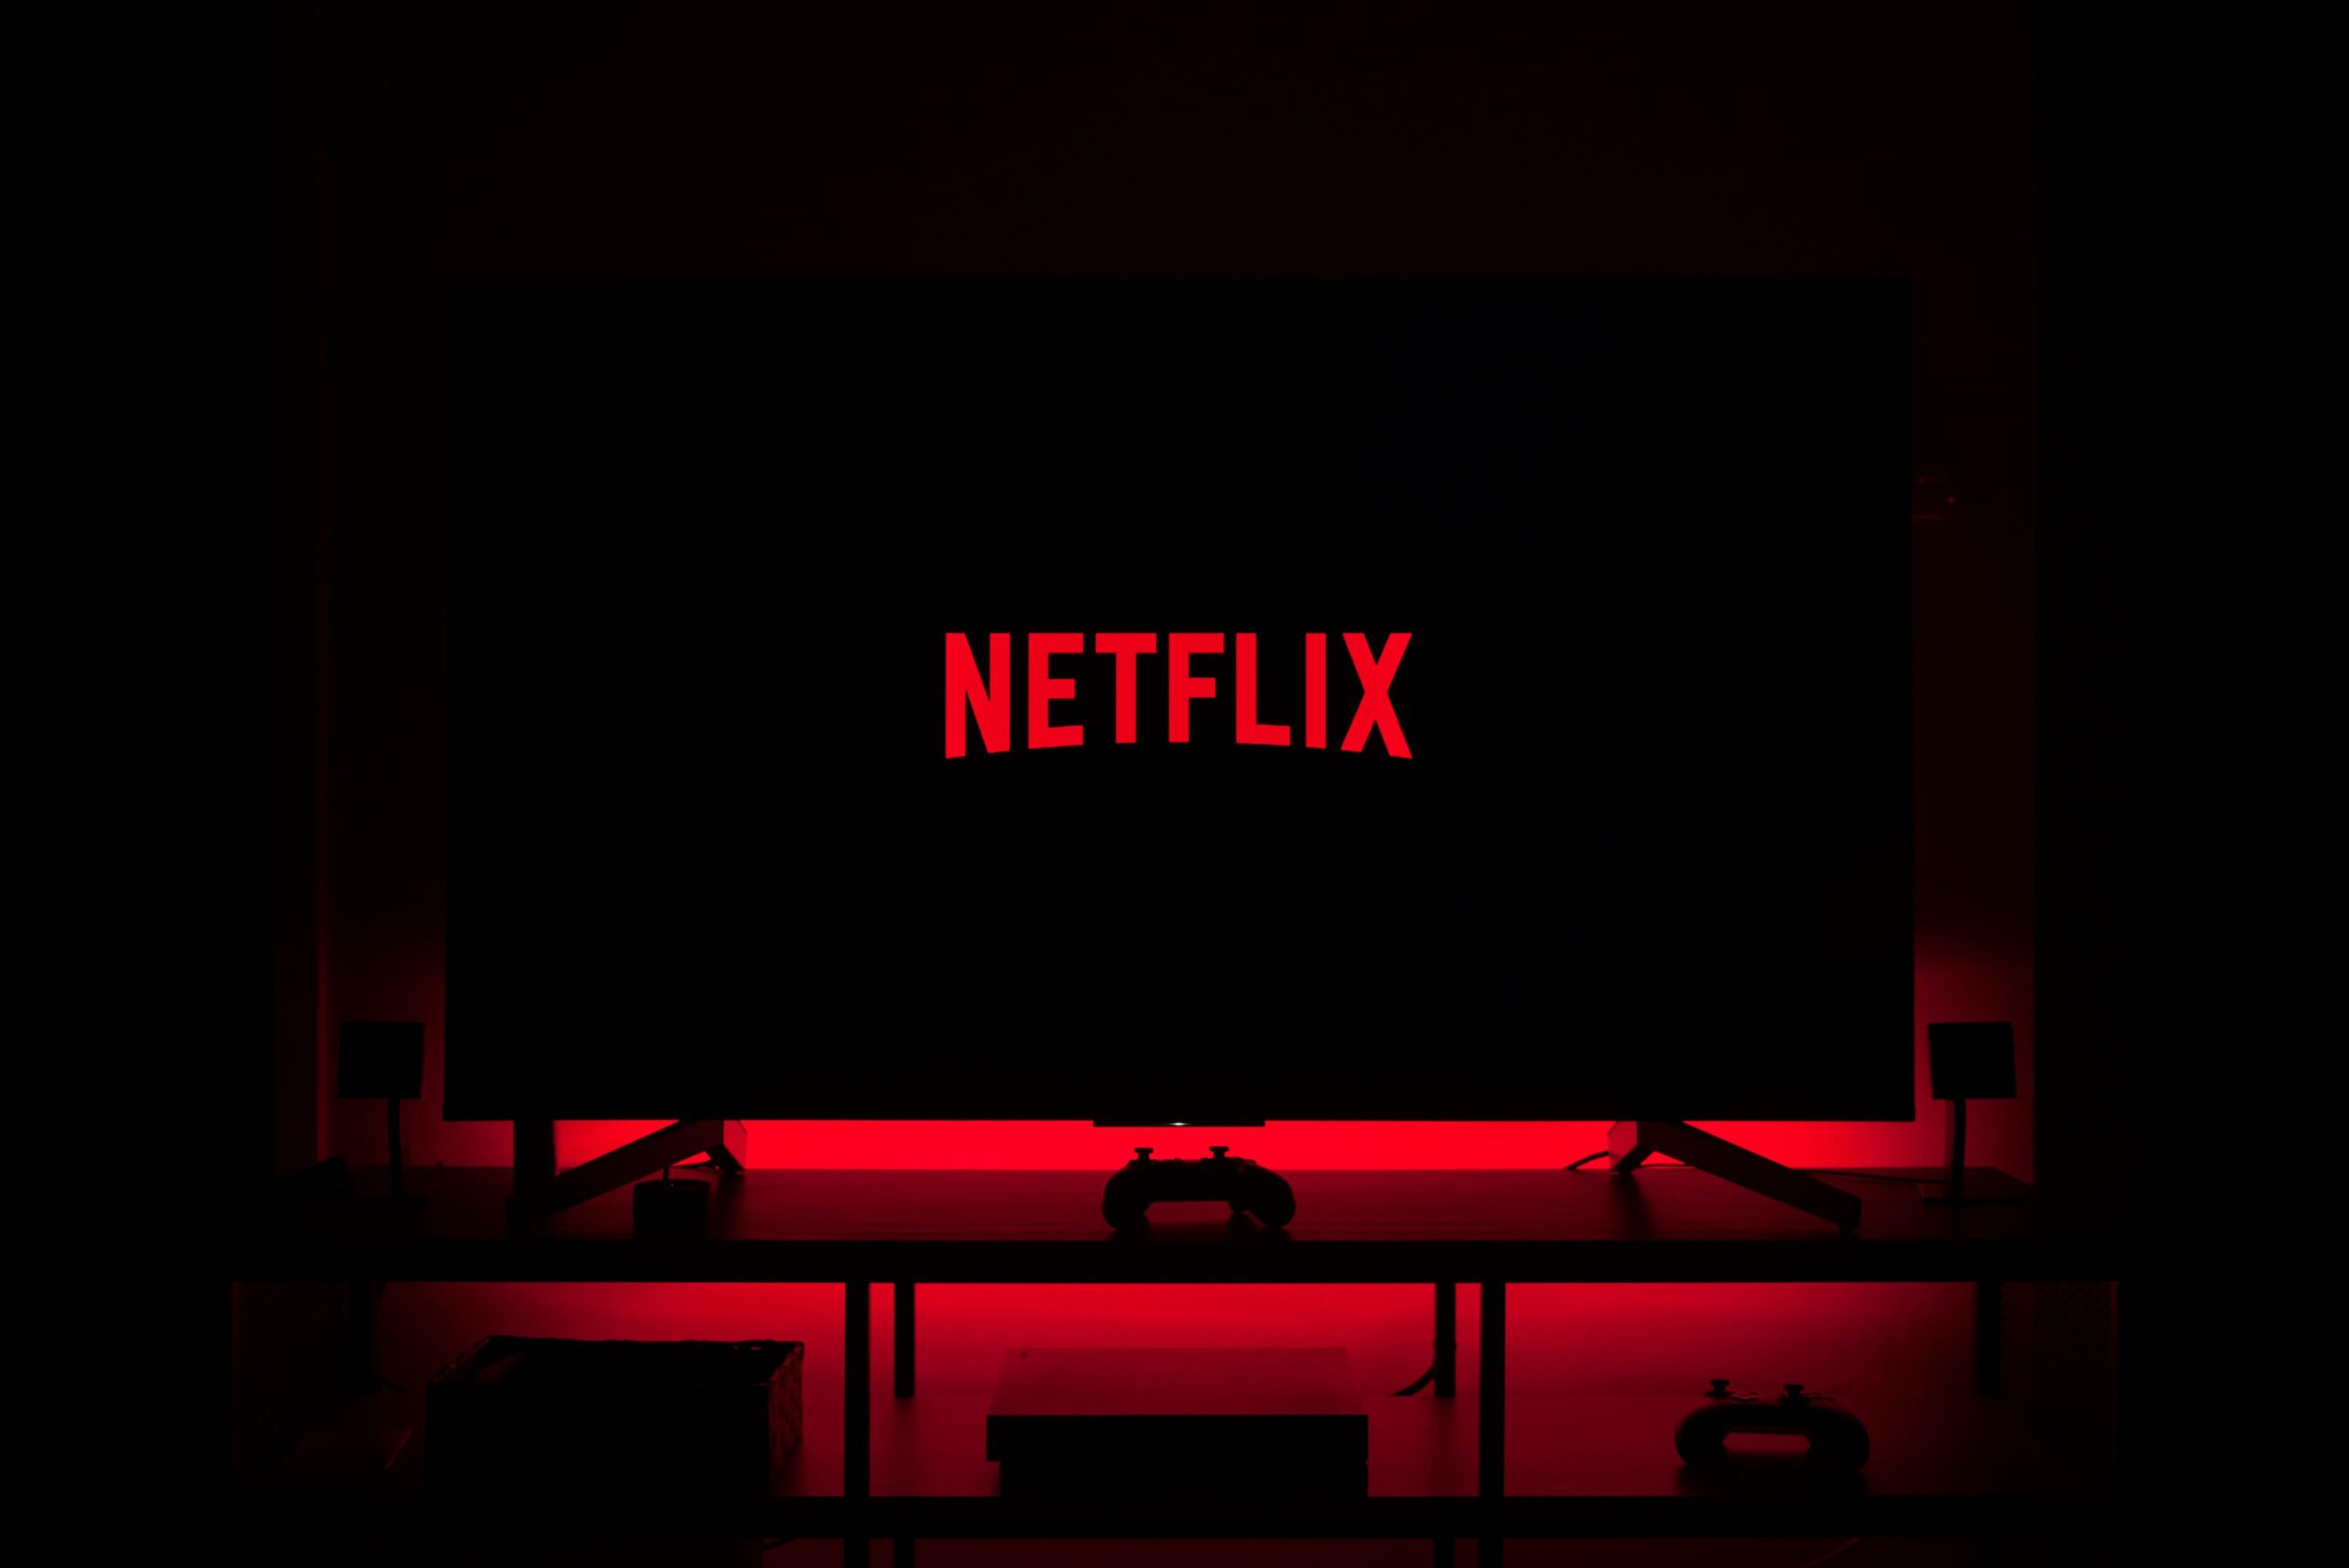 An image of the Netflix logo on a TV.